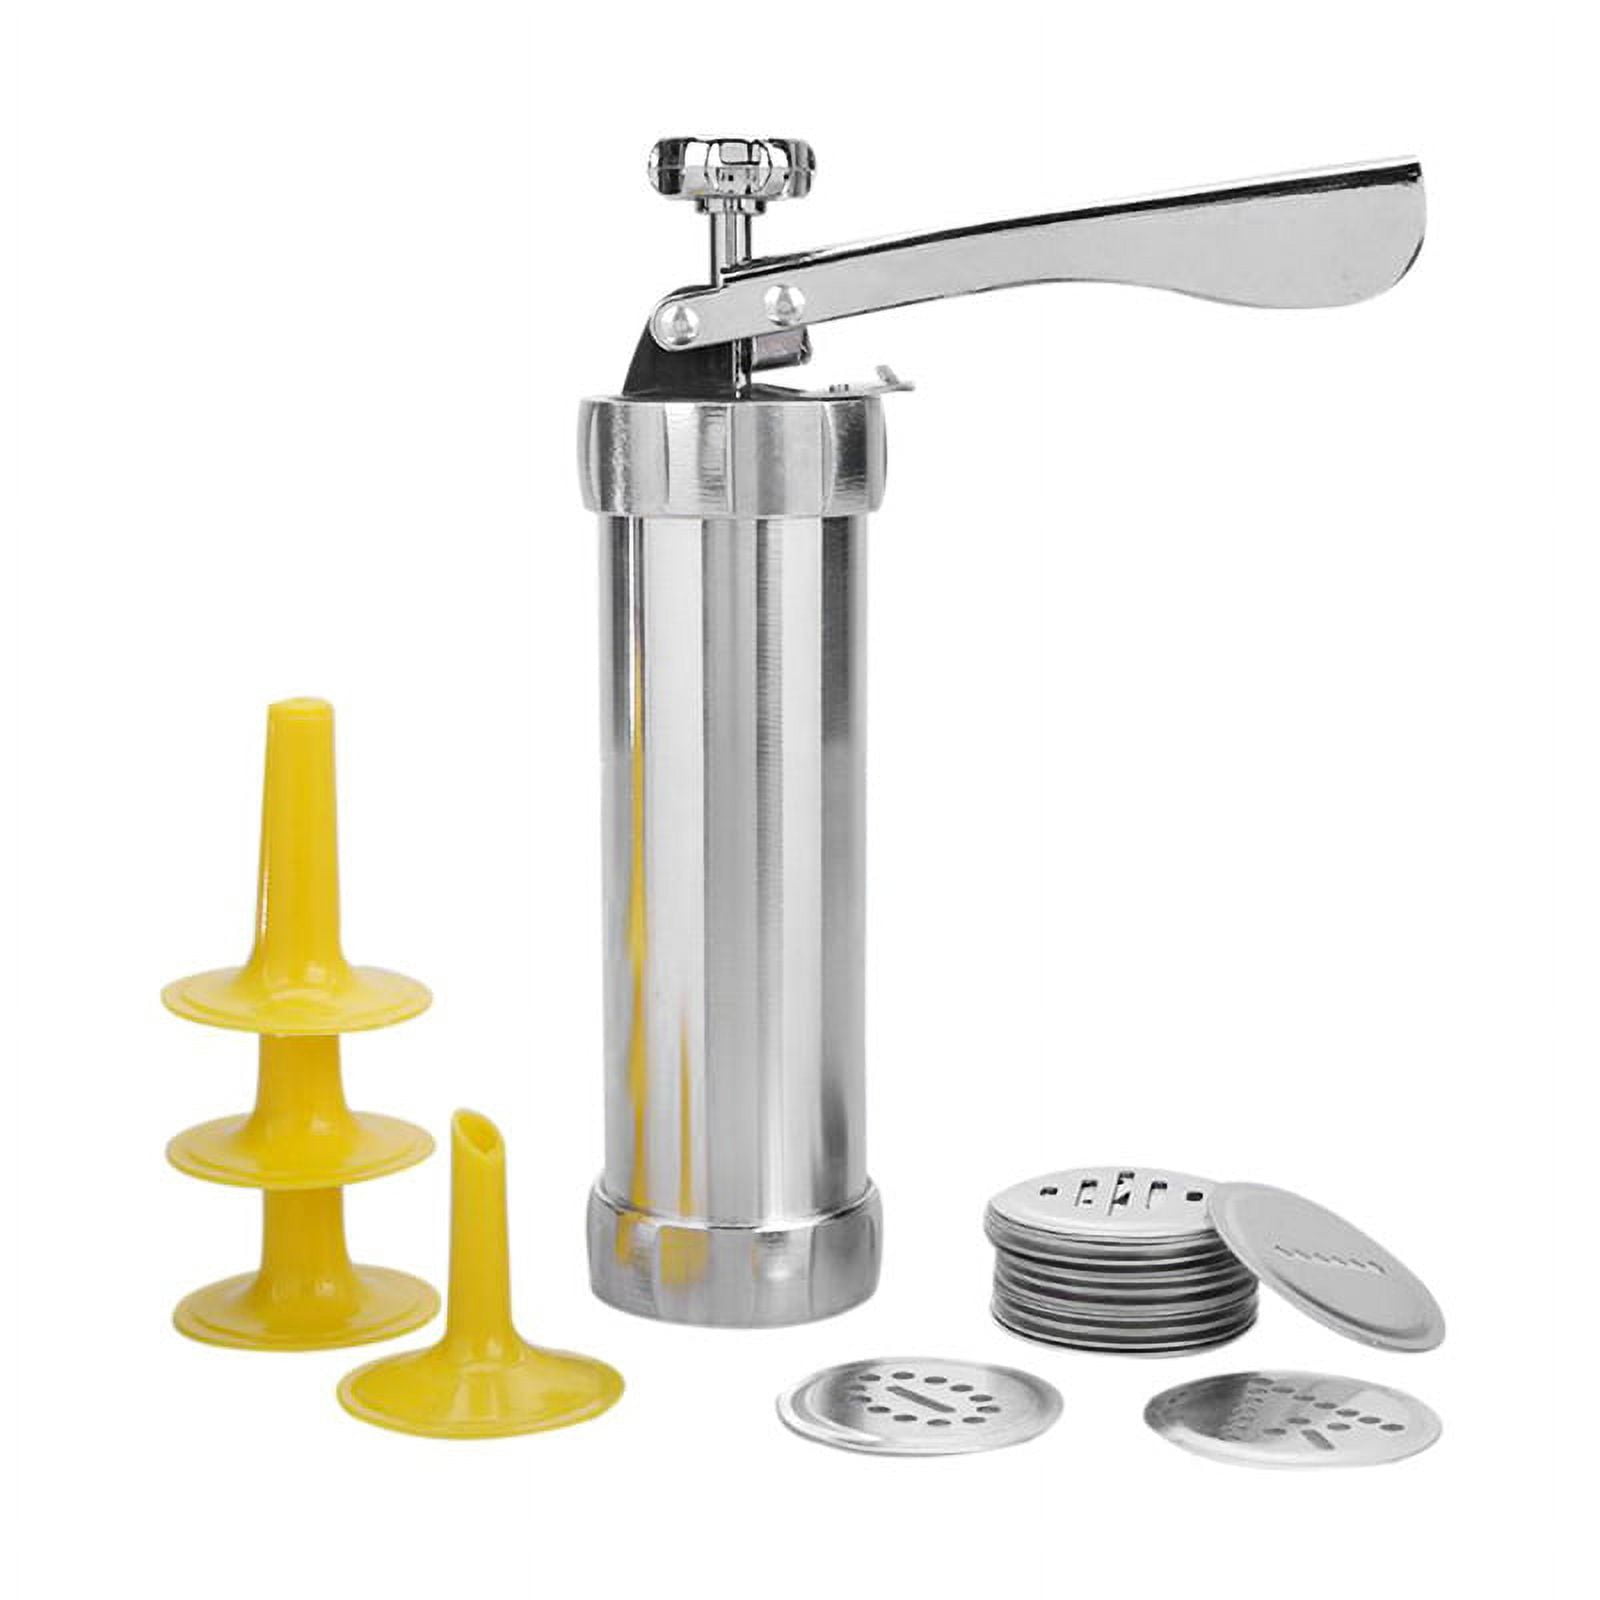 Littleduckling Cookie Press Stainless Steel Cookie Press Gun Kit Biscuit Maker and Churro Maker Cookie Press Machine with 20 Cookie Discs 4 Nozzles